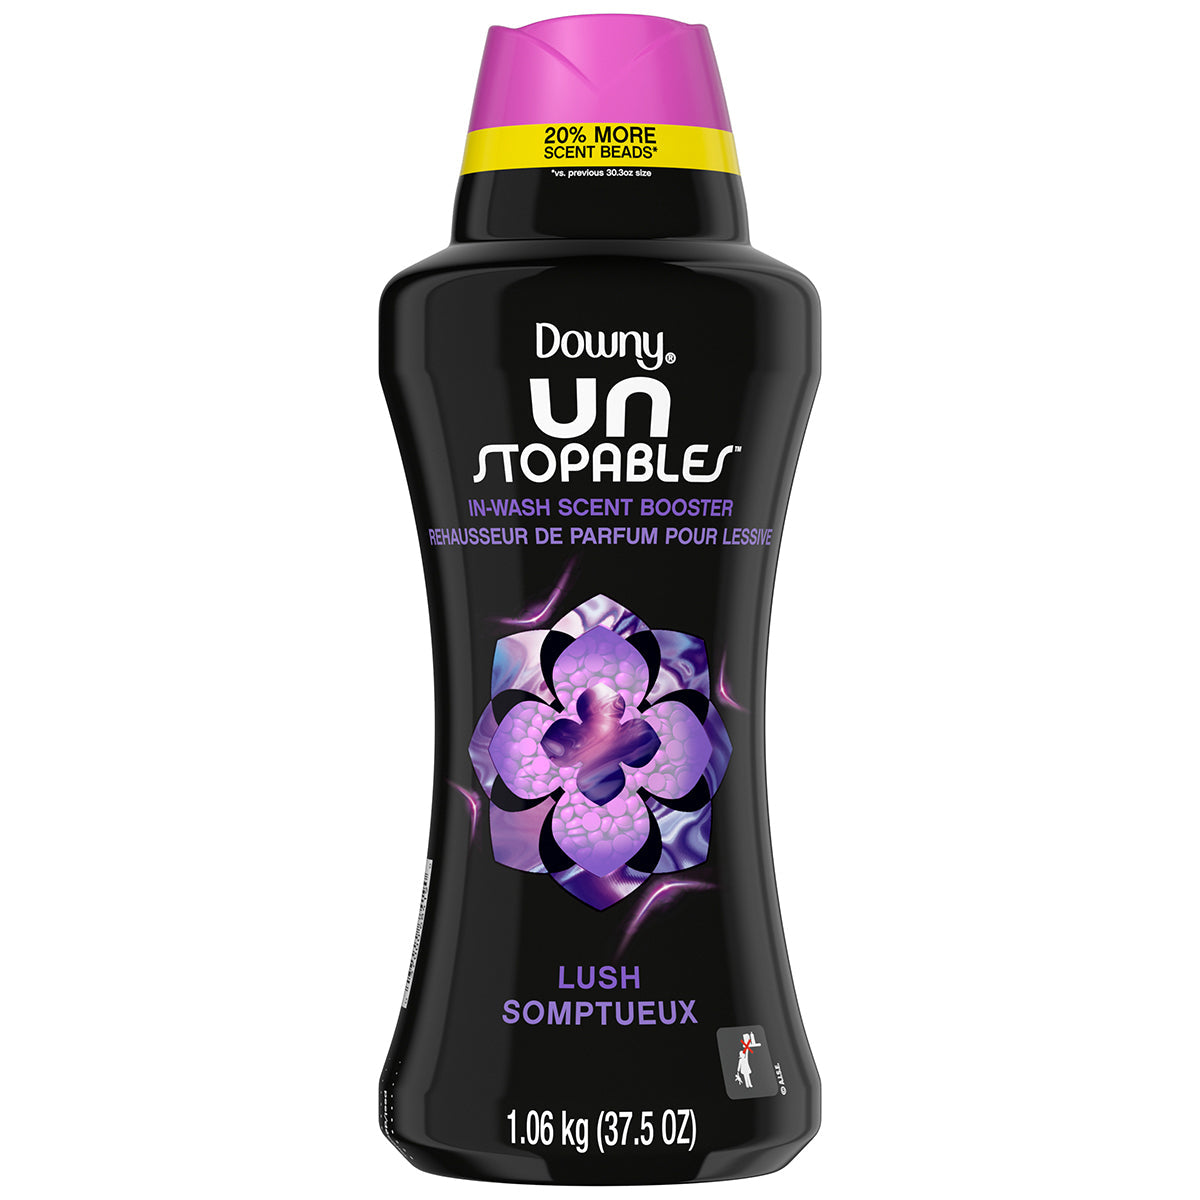 Downy Lush Somptueux In-Wash Scent Booster Large